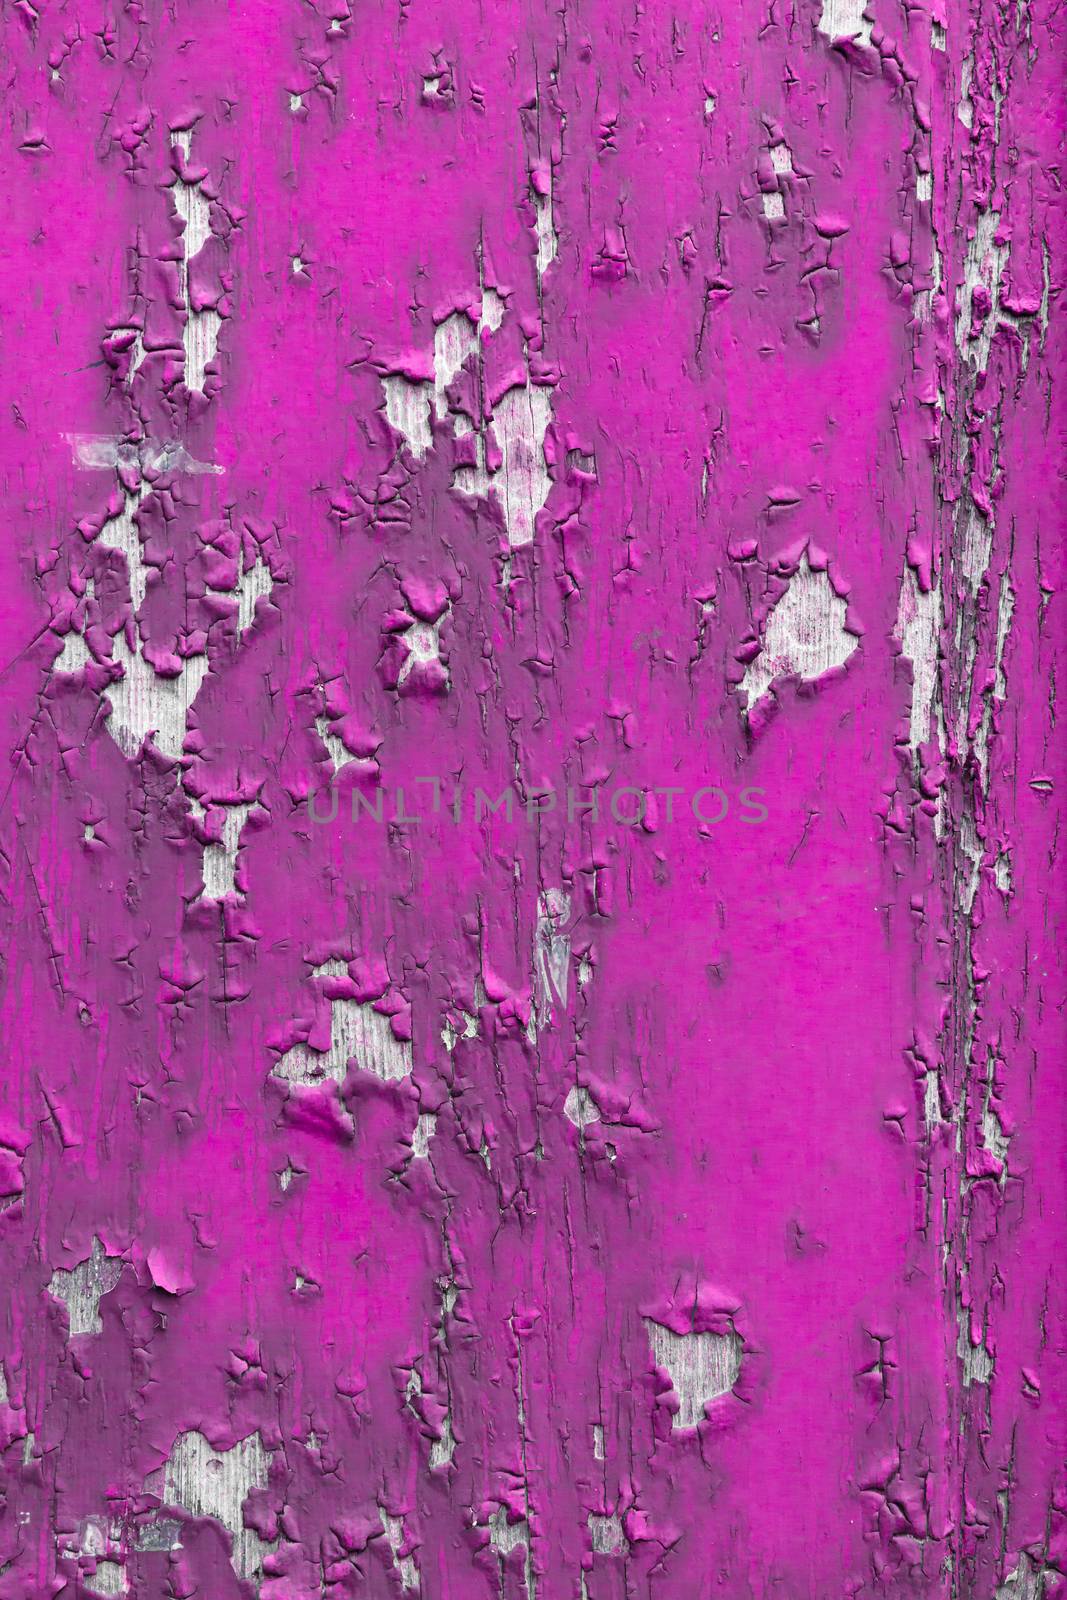 A wooden surface, painted pink with obvious signs of cracking and peeling paint.